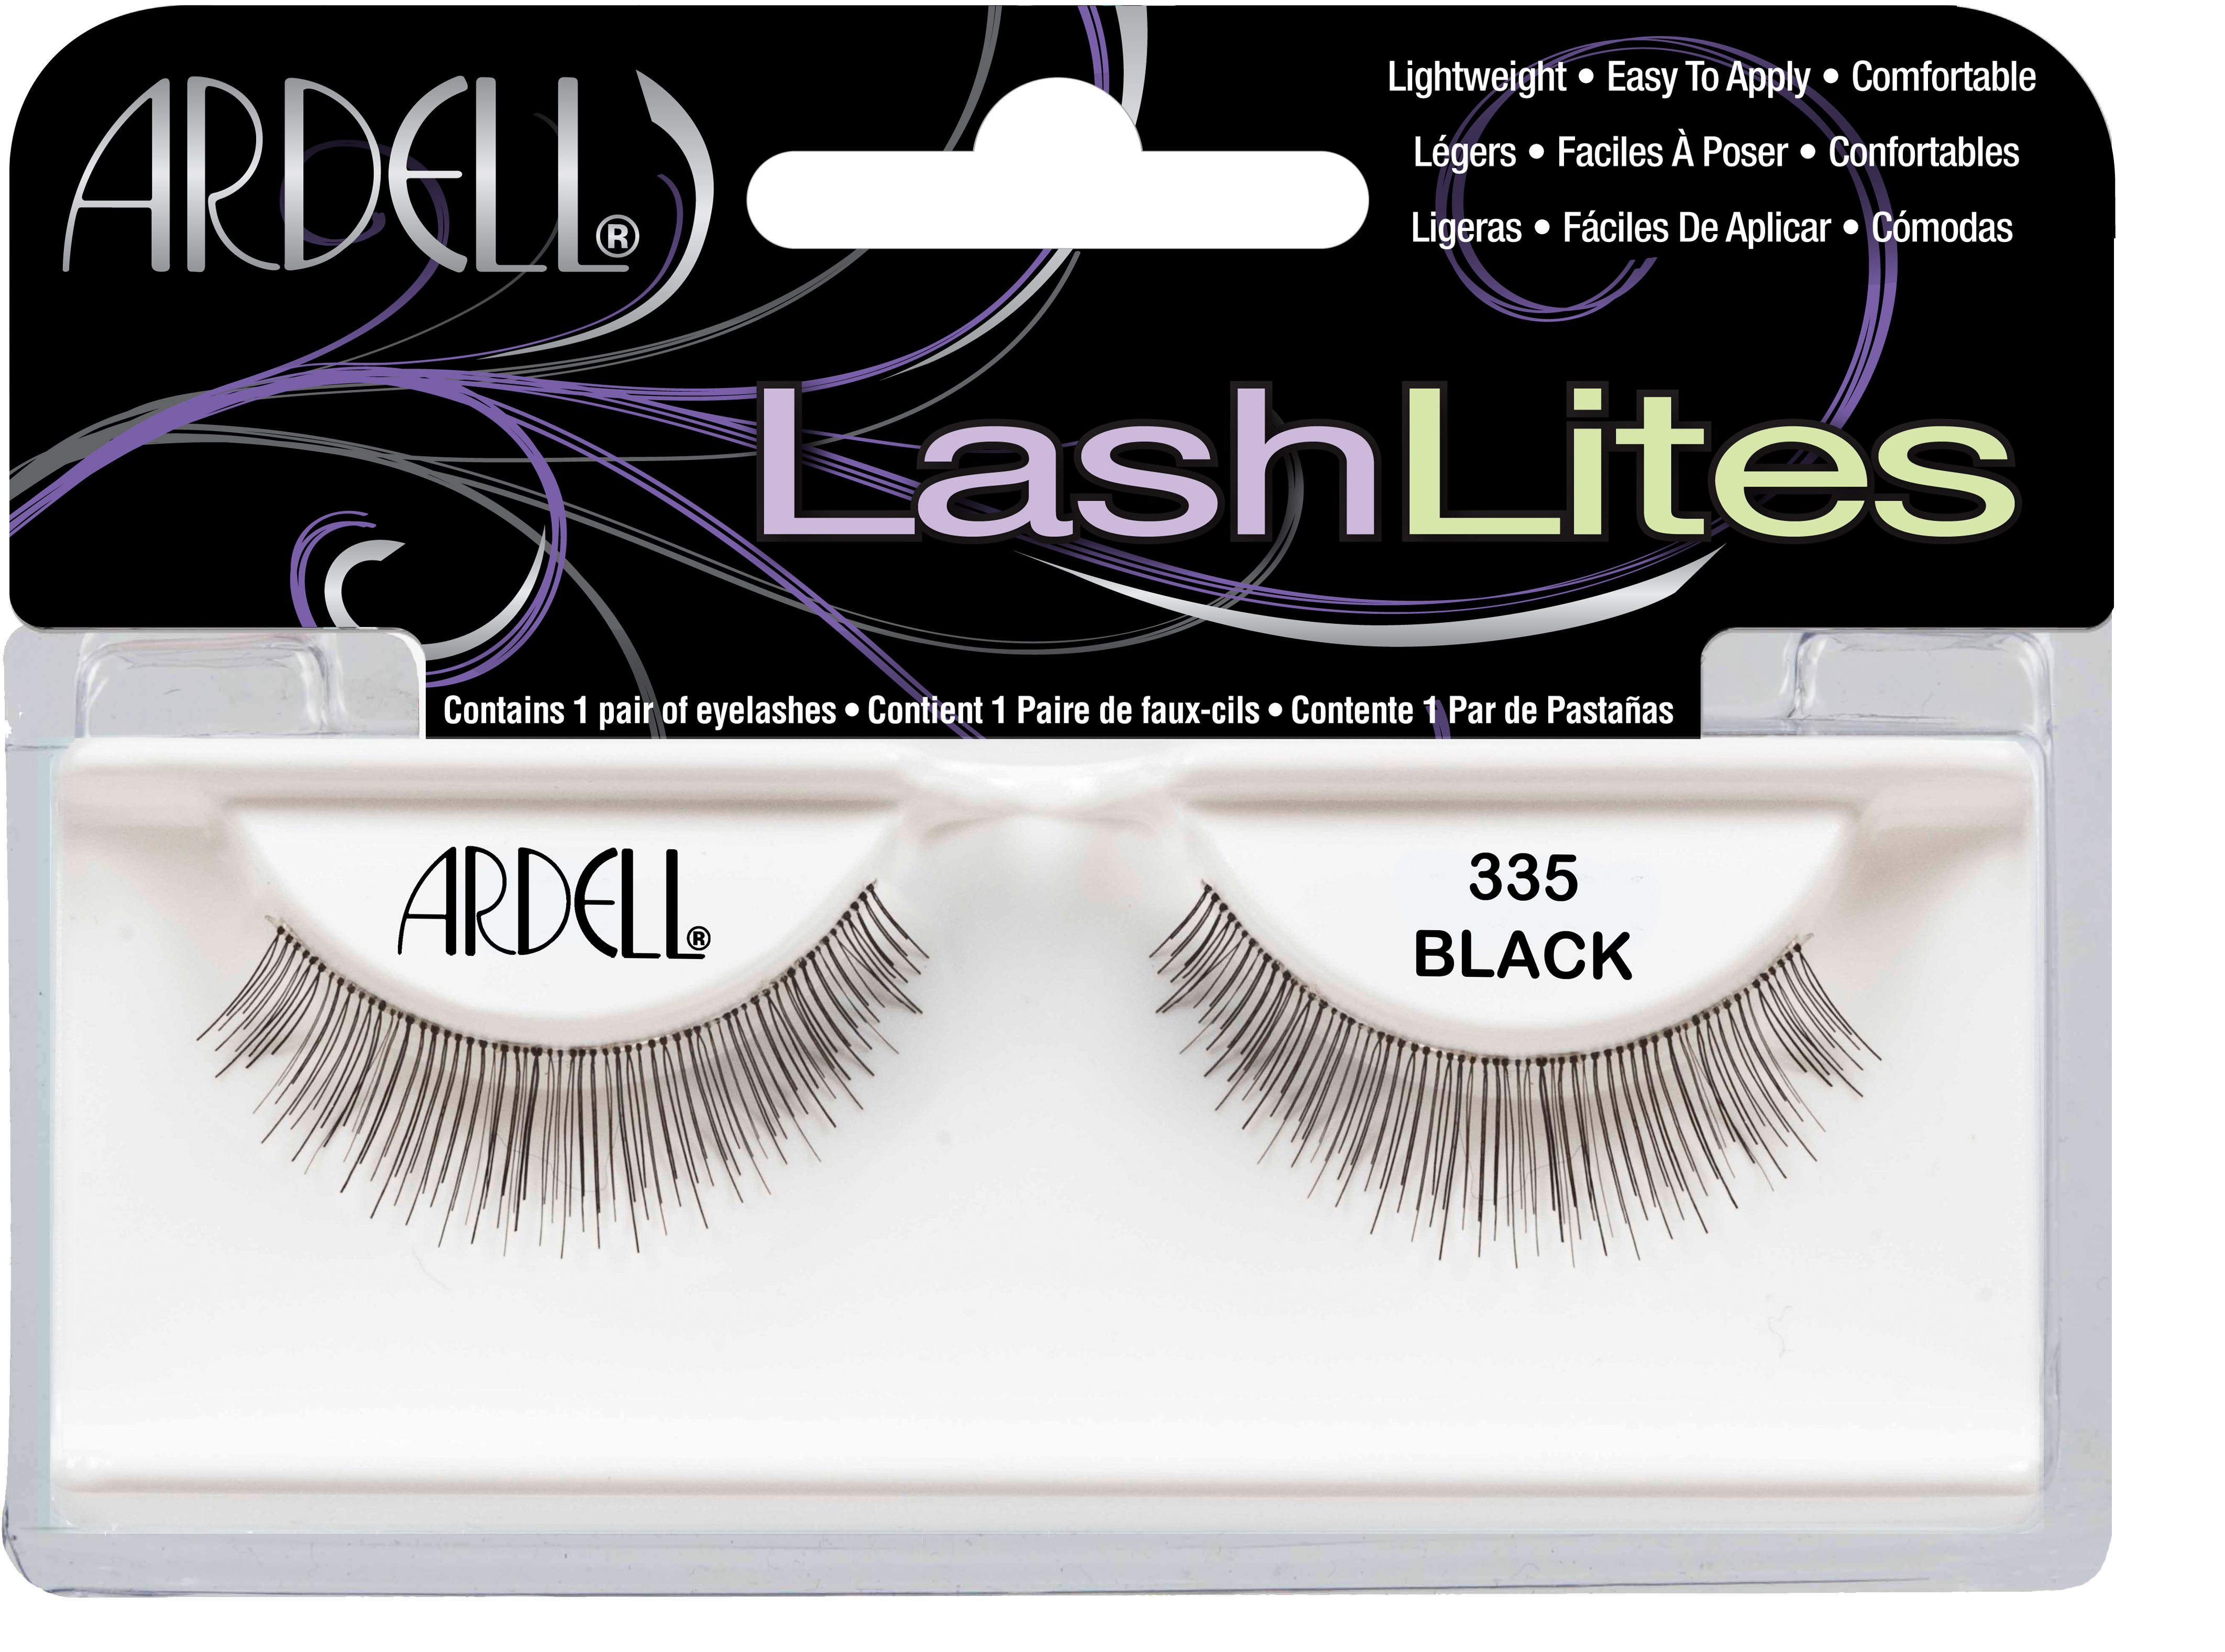 Ardell Lash Lites Most Natural Styles 335